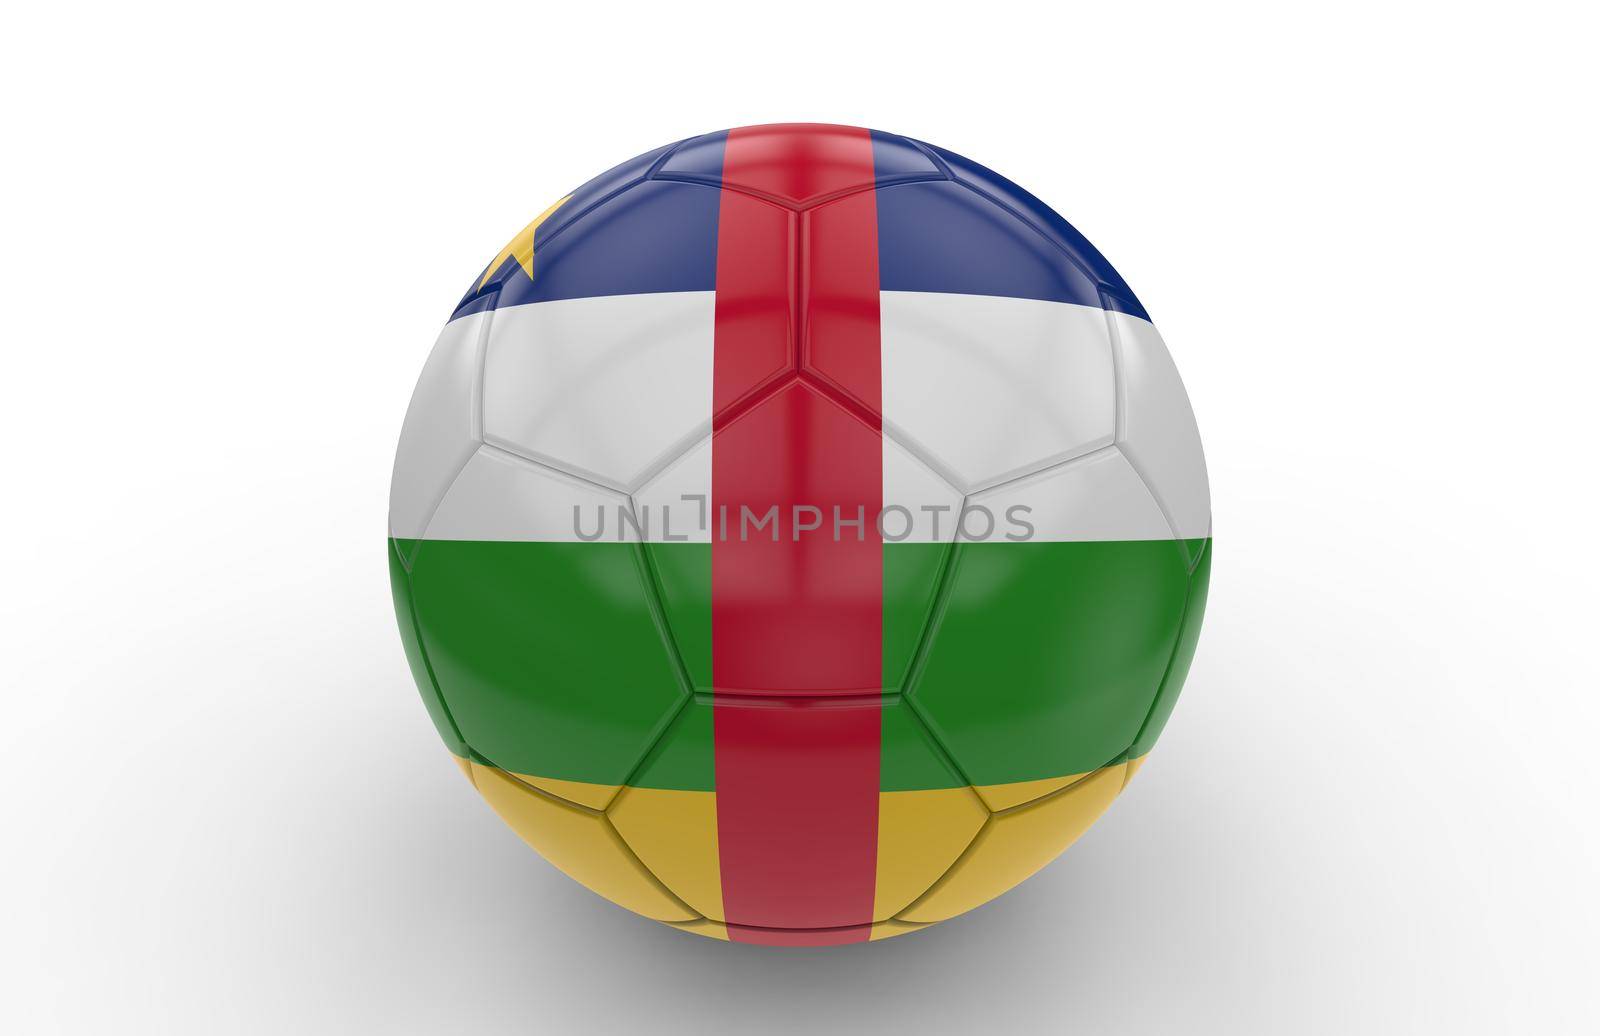 Soccer ball with Central Africa Republic flag isolated on white background; 3d rendering